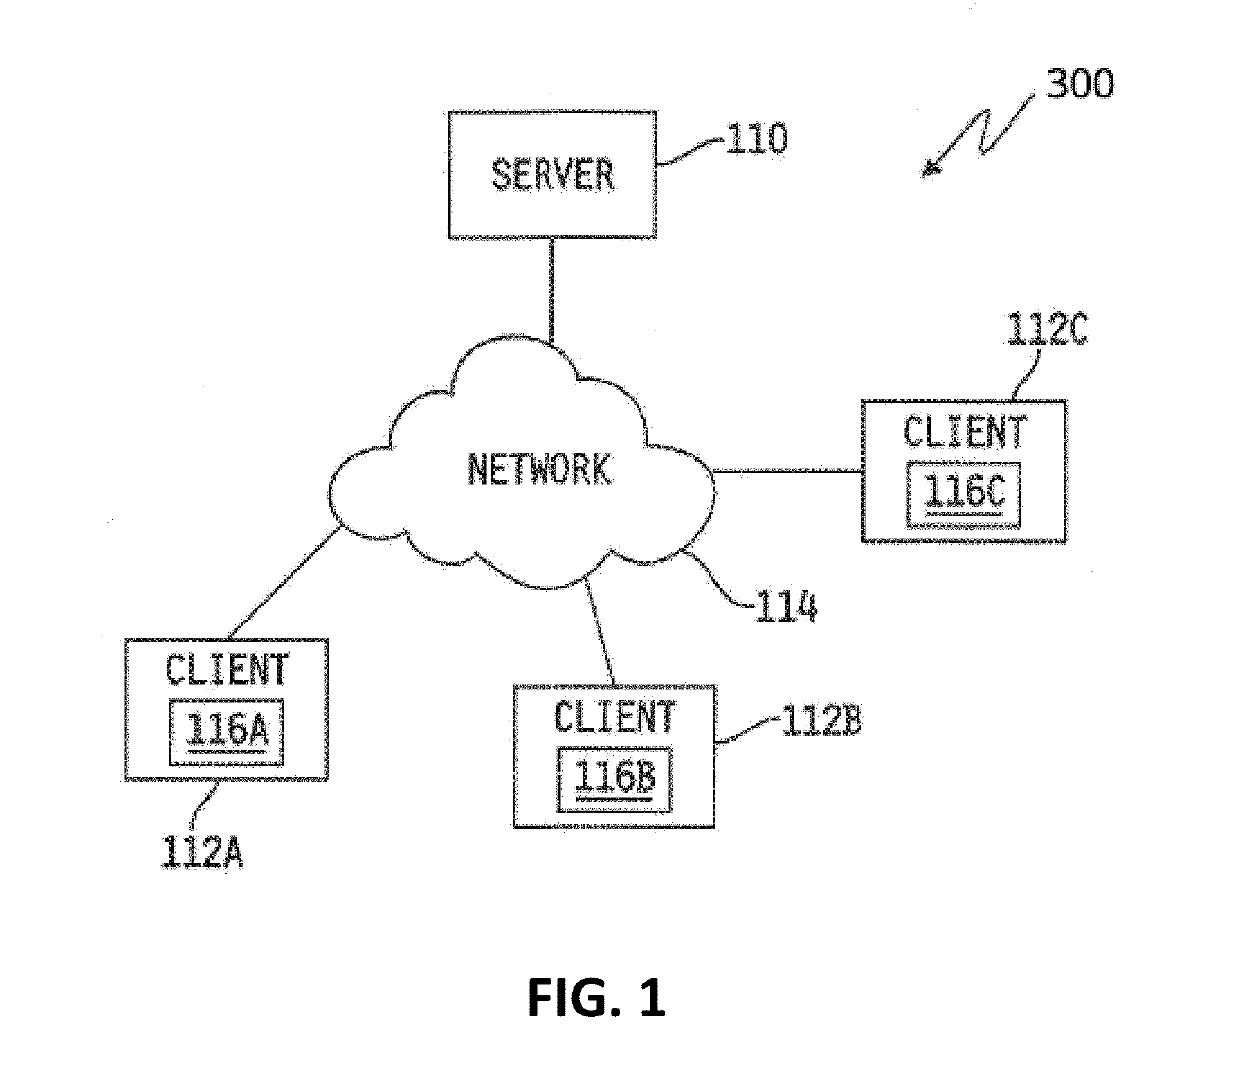 Networking systems and methods for facilitating communication and collaboration using a social-network and interactive approach